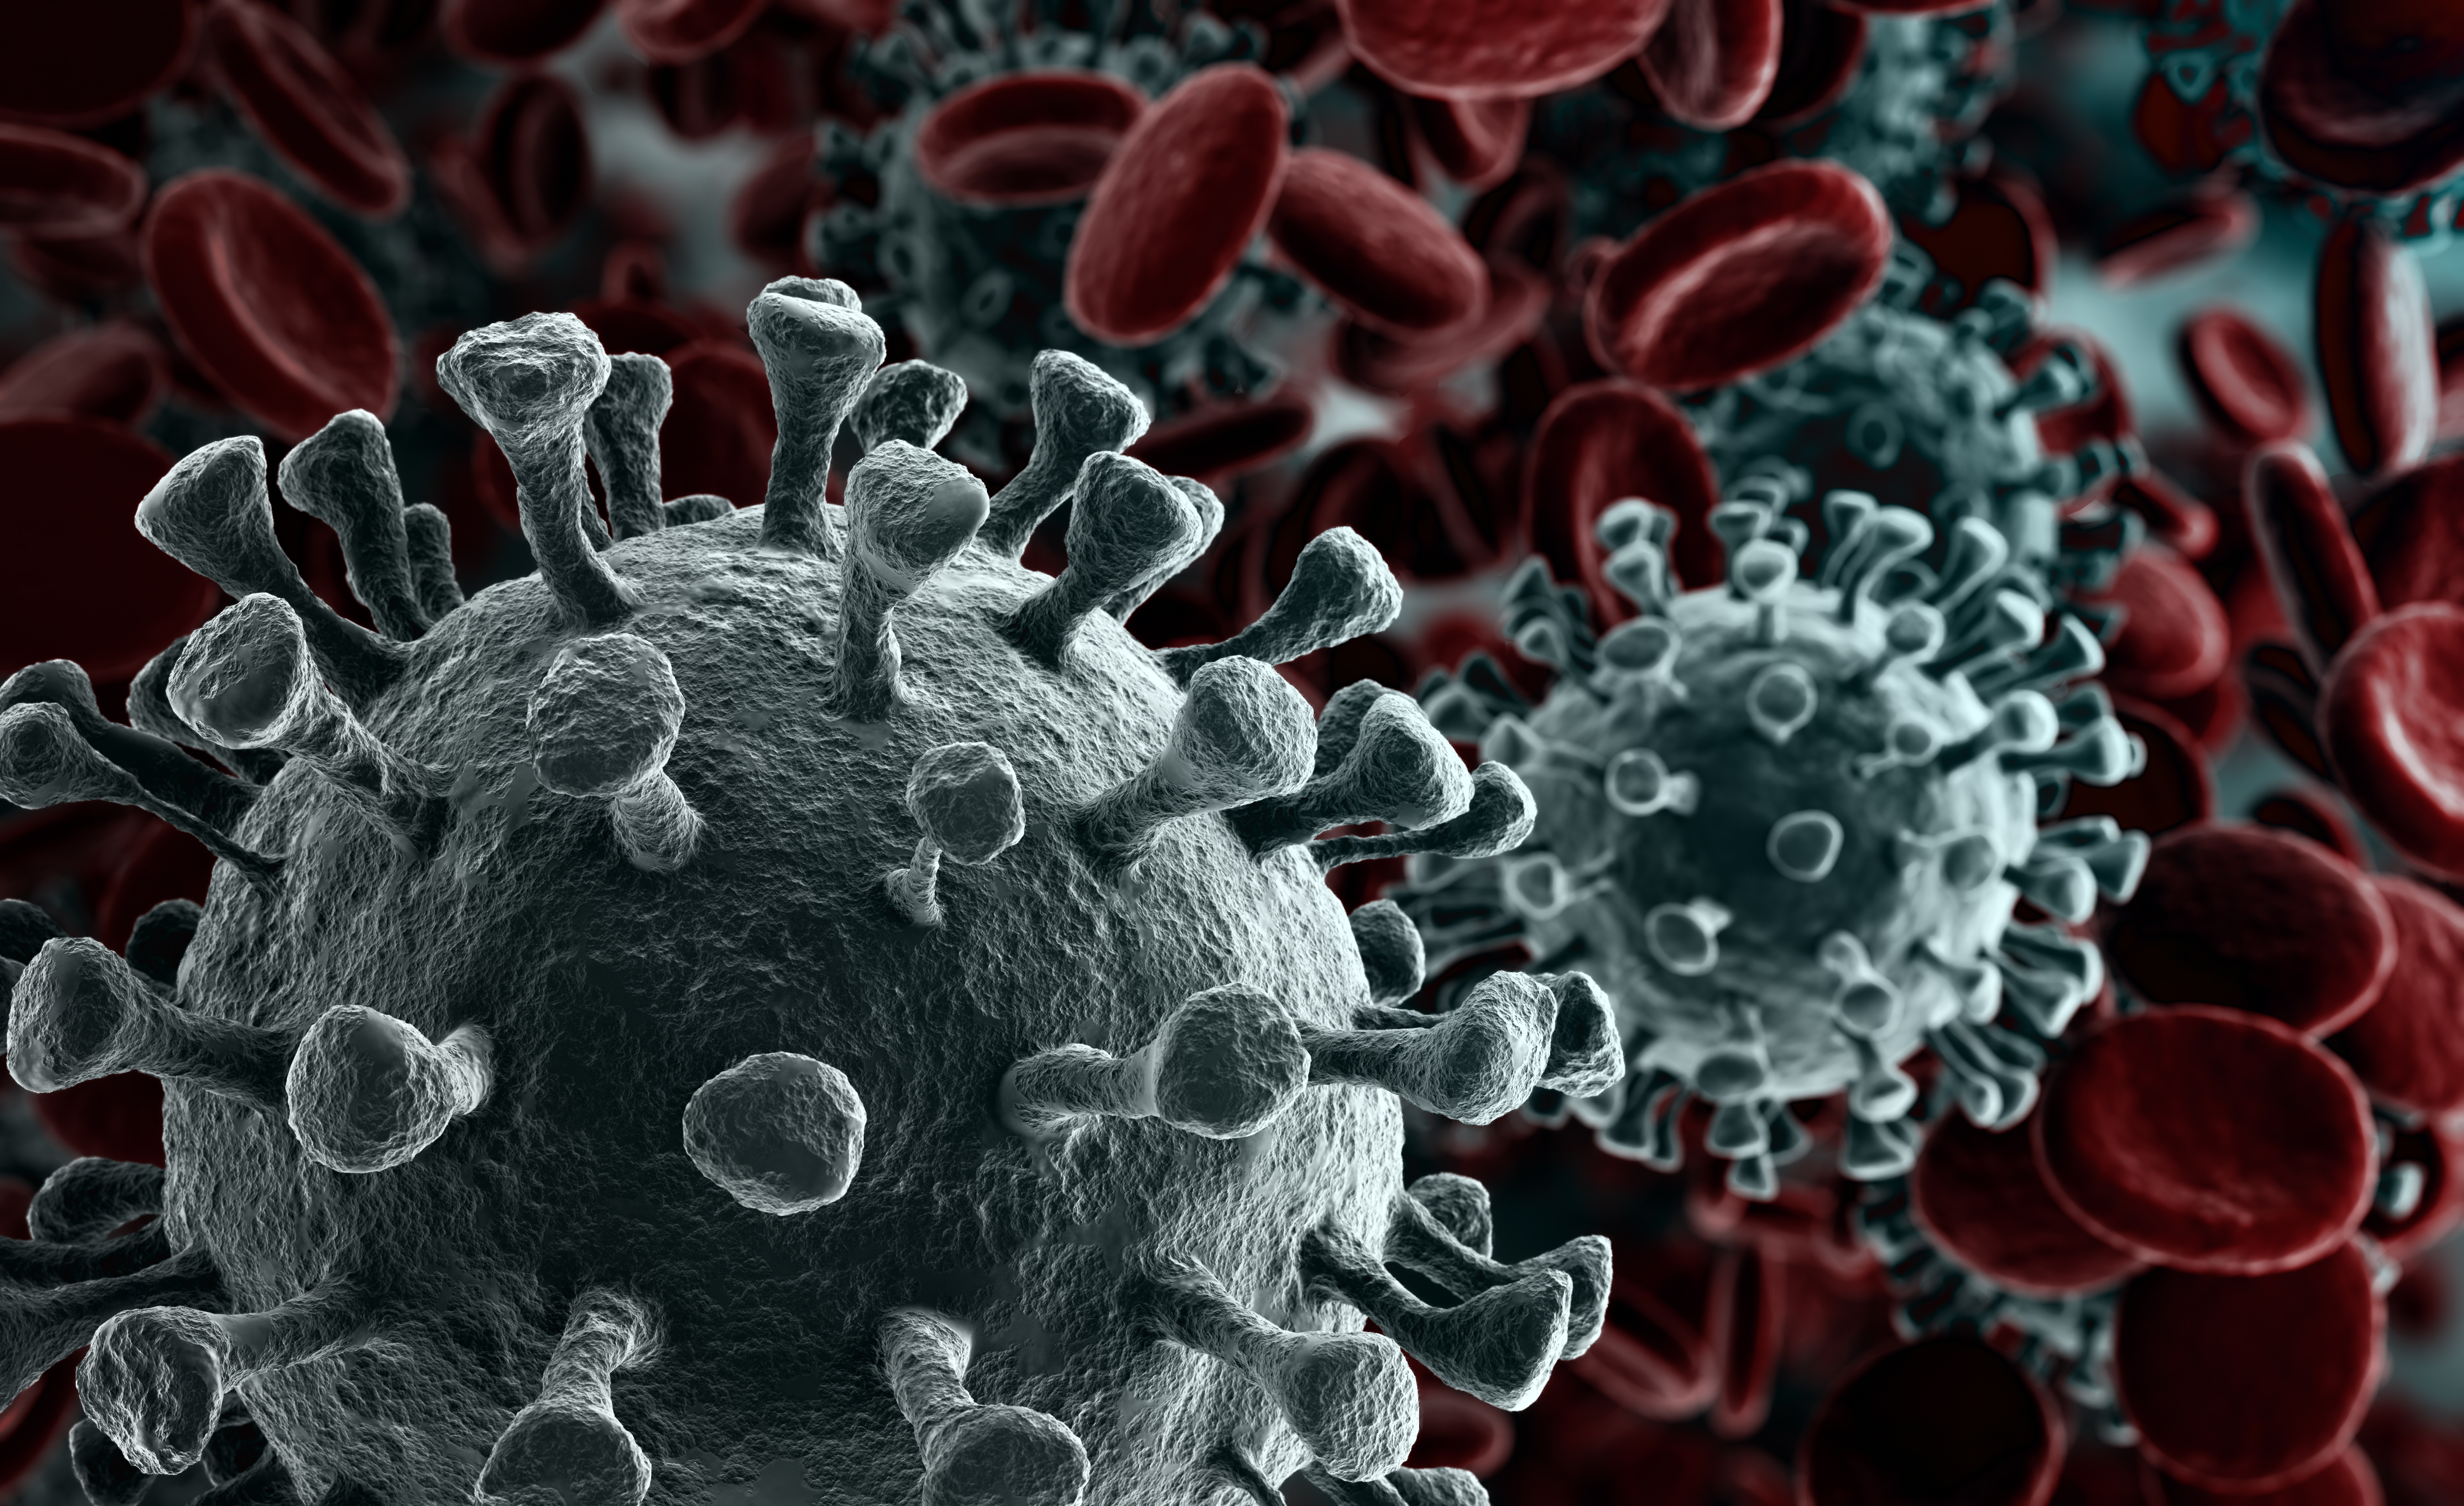 A close up image of virus particles